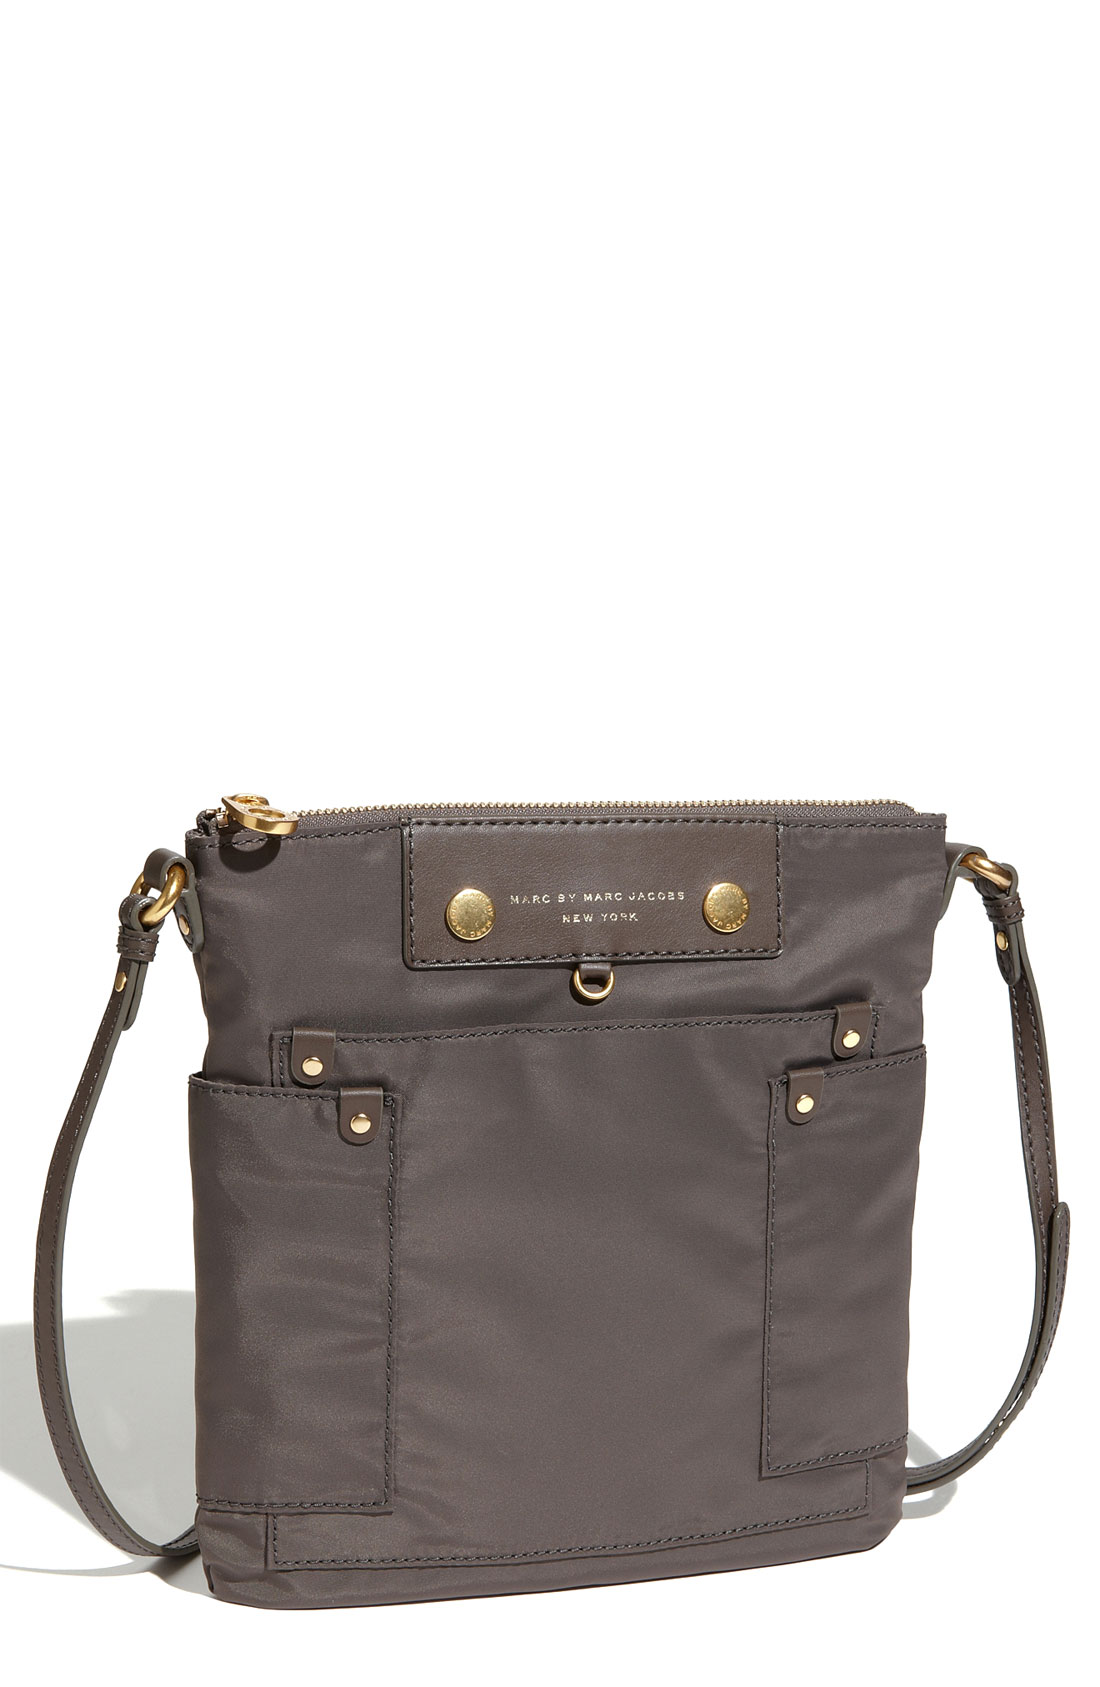 Marc By Marc Jacobs Preppy Nylon Sia Crossbody Bag in Gray (faded aluminum) | Lyst